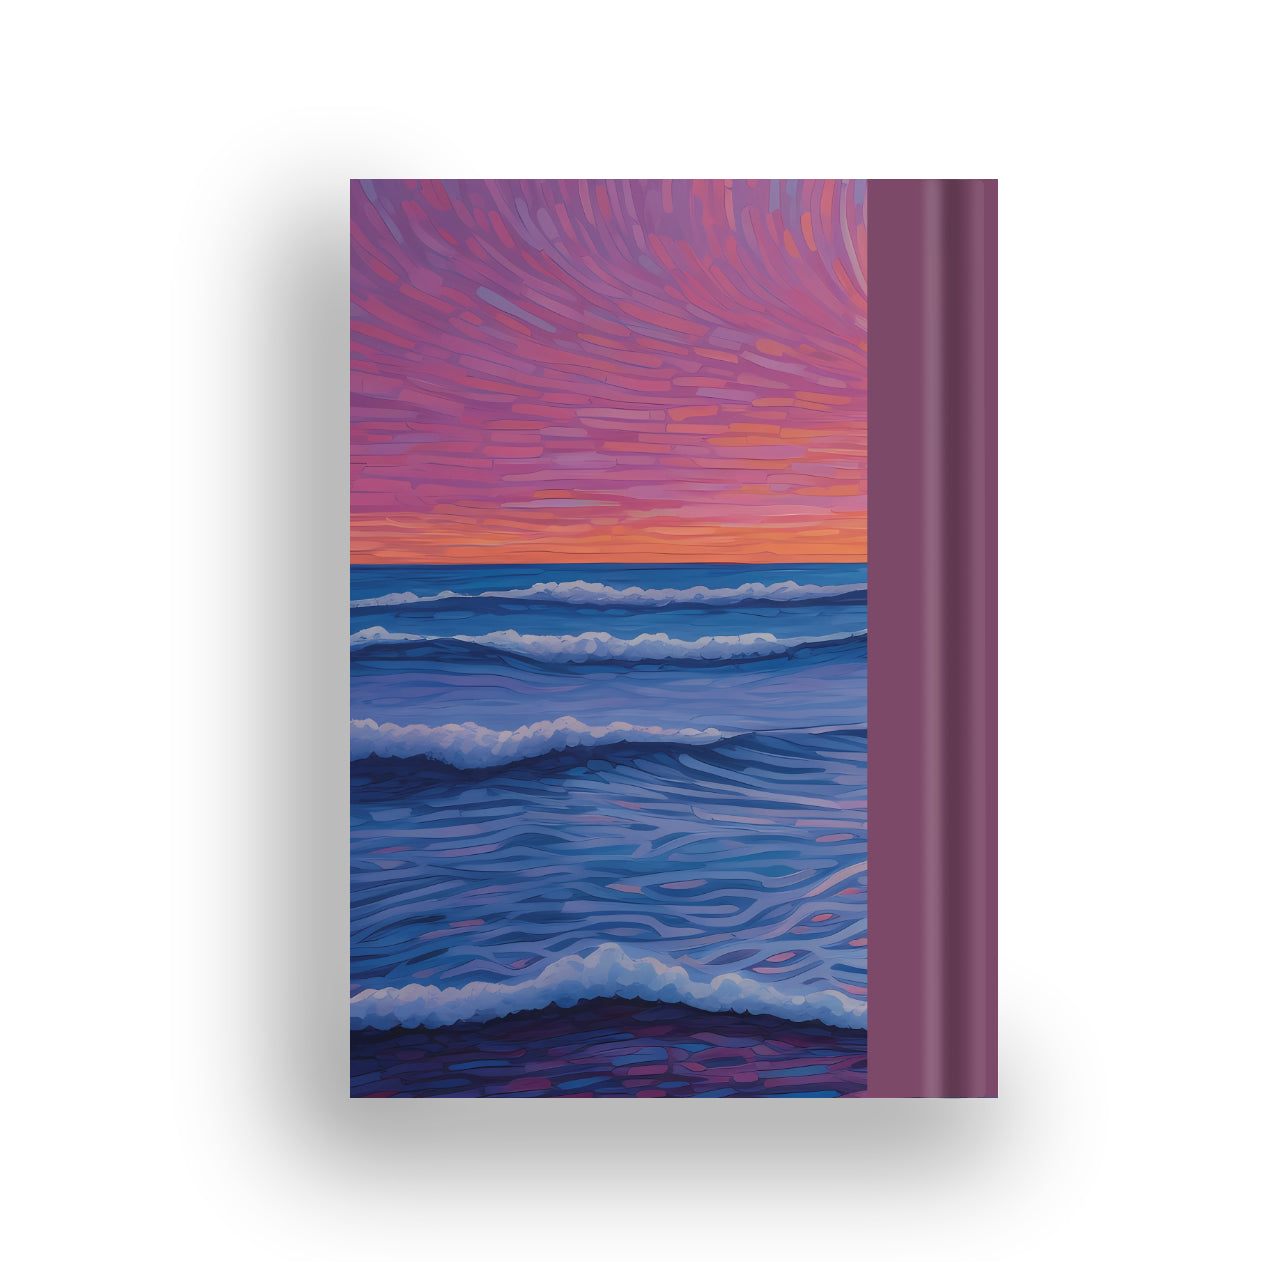 Tidal notebook back cover with ocean wave design